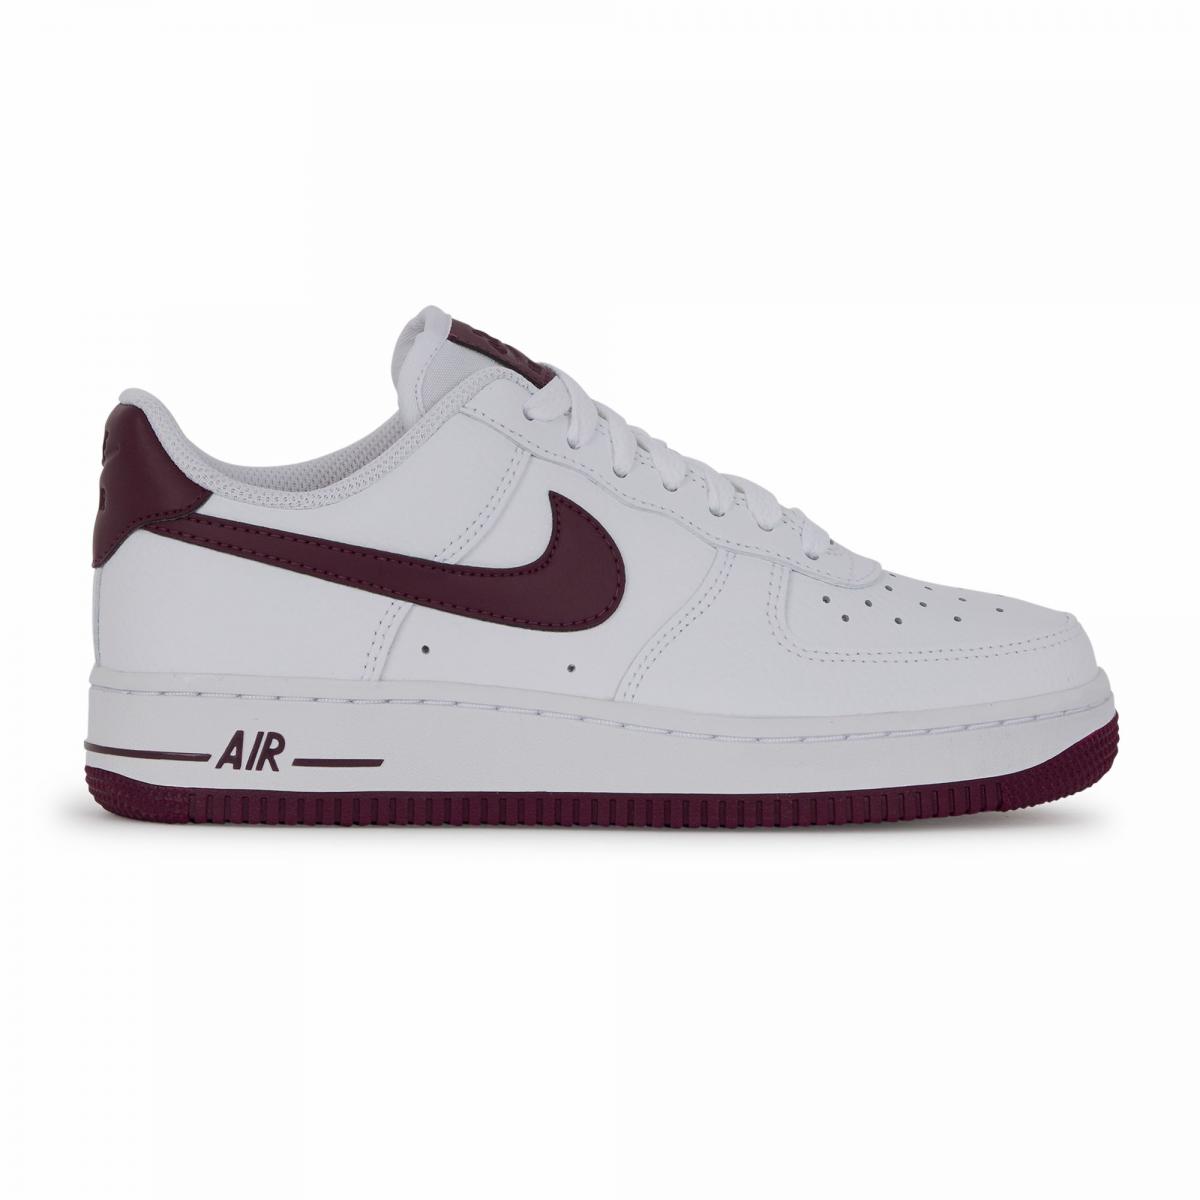 nike air force 1 femme basse,Chaussure Nike Air Force 1 Low pour ...